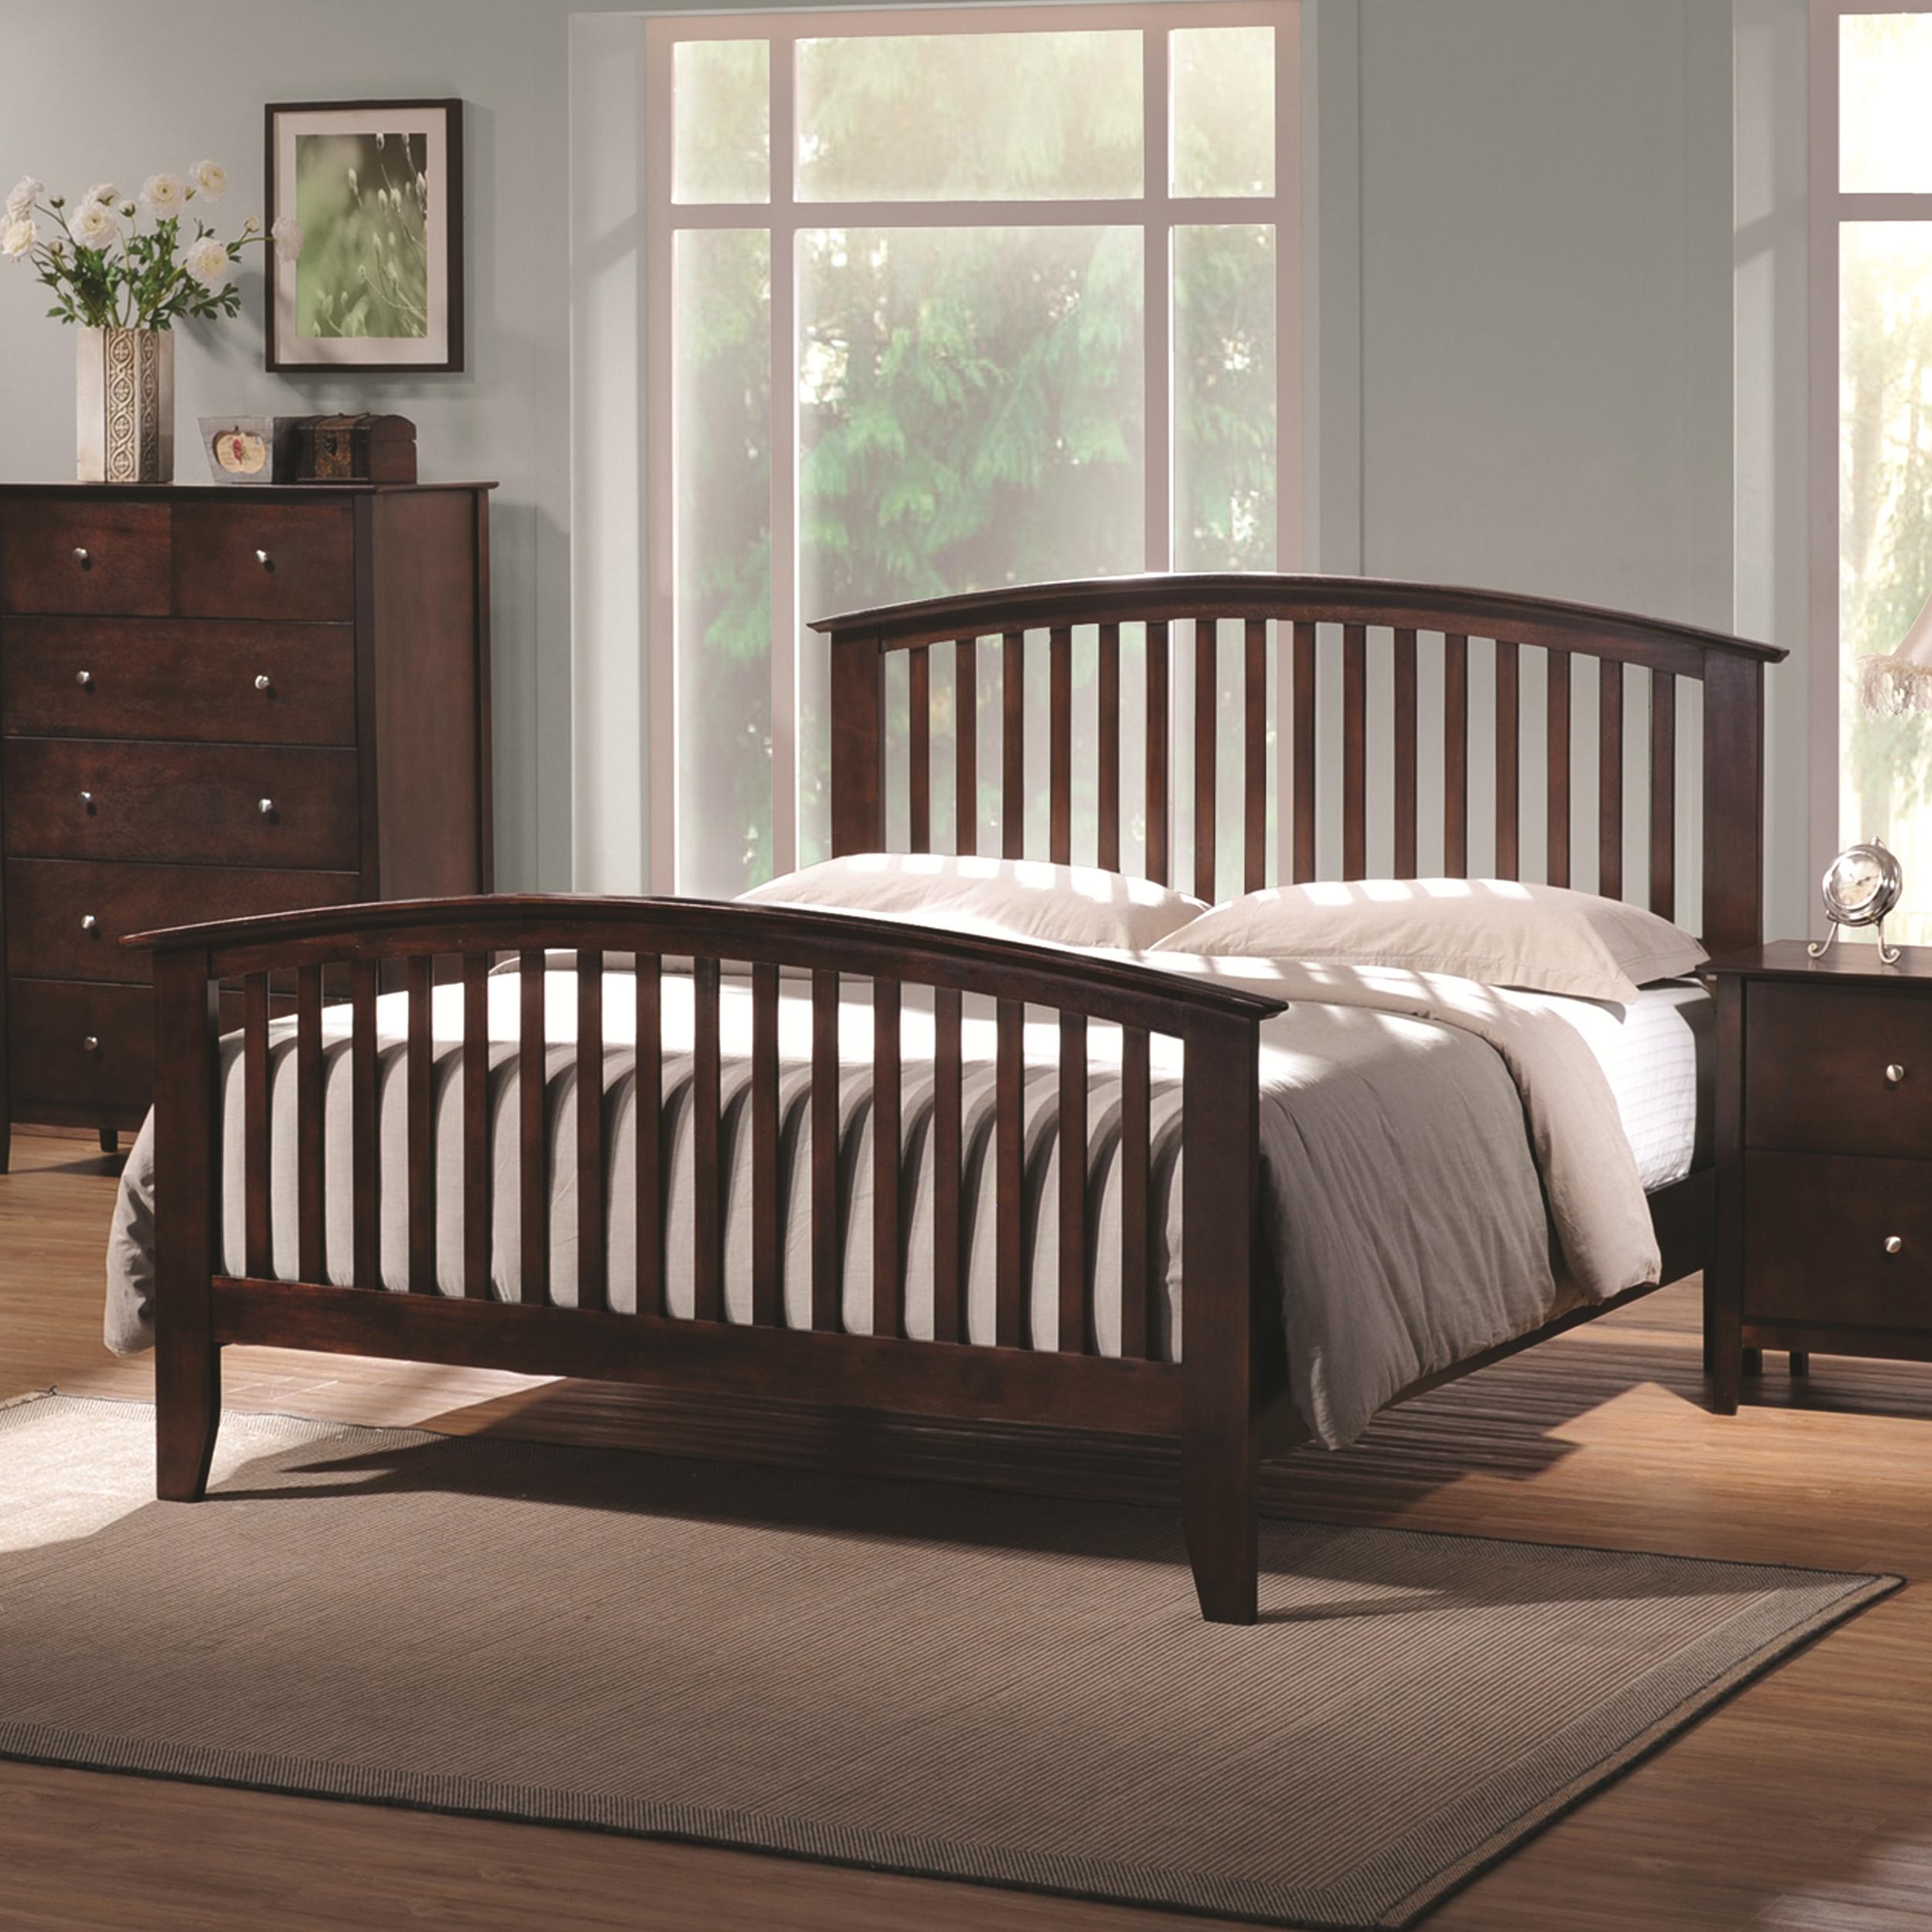 Coaster 202081q Tia Cappuccino Slatted, King Size Bed Frame With Headboard And Footboard Dimensions